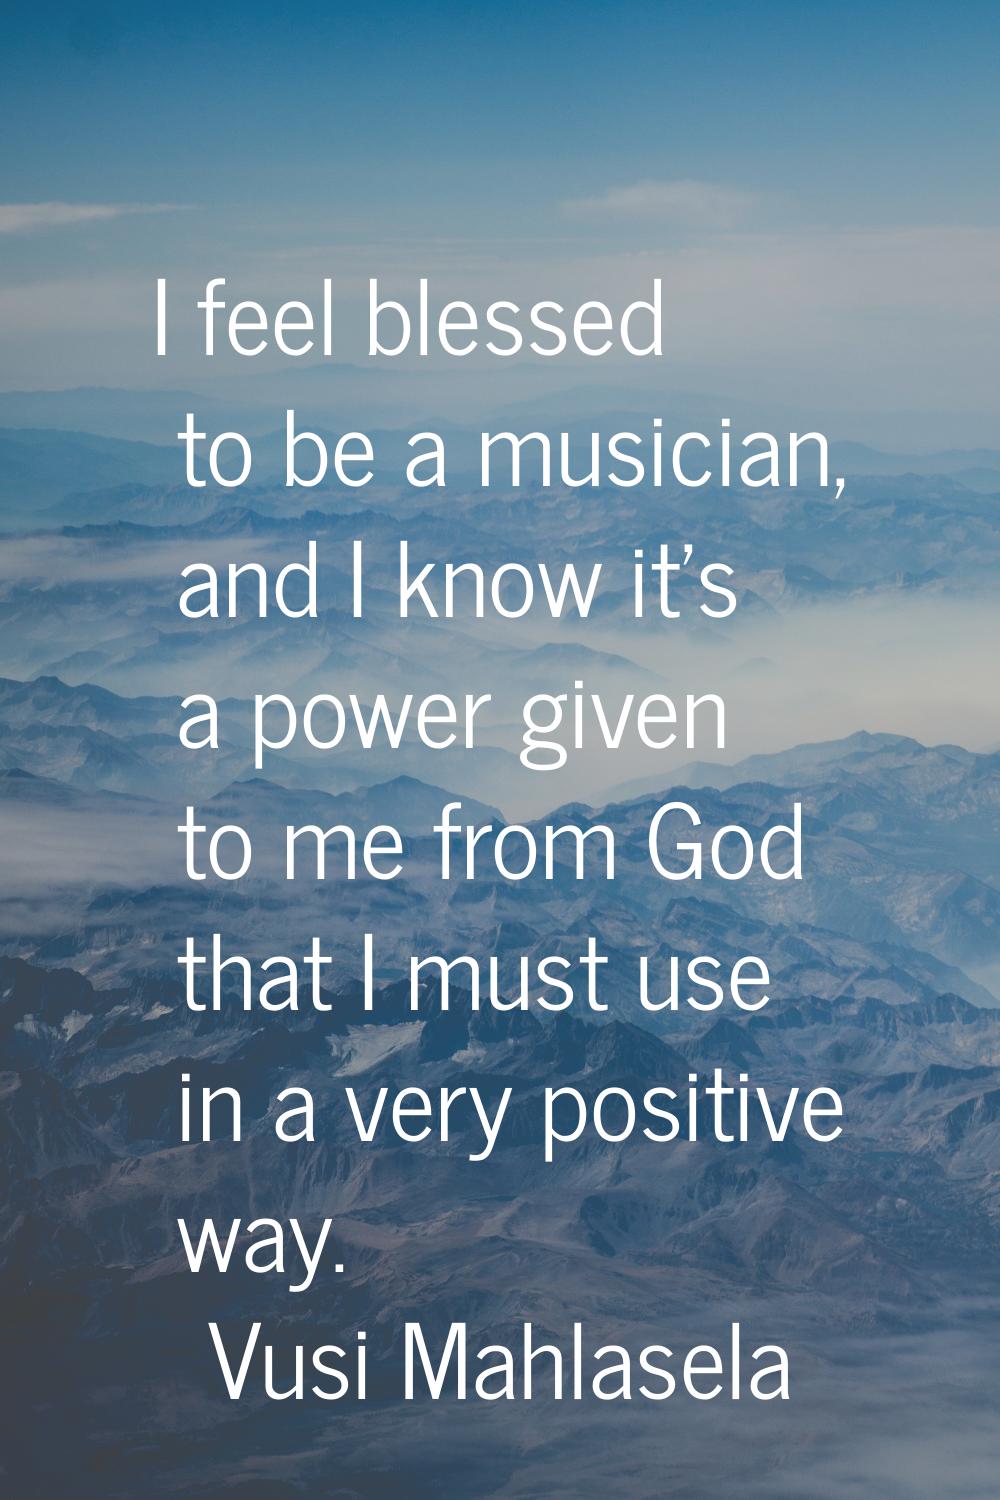 I feel blessed to be a musician, and I know it's a power given to me from God that I must use in a 